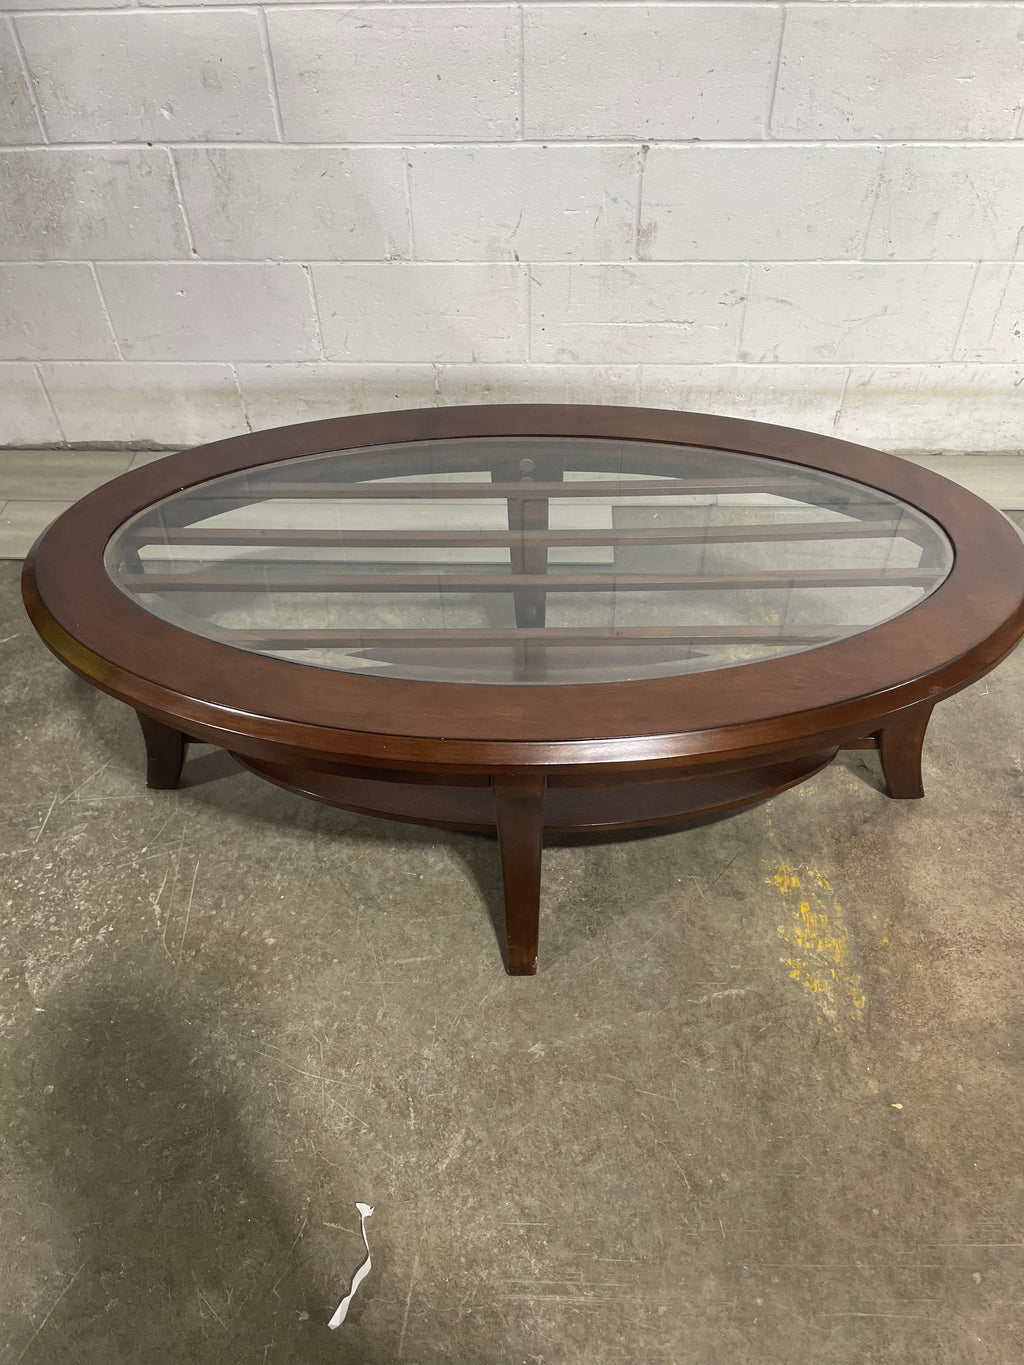 48"W Wooden Table Glass Top